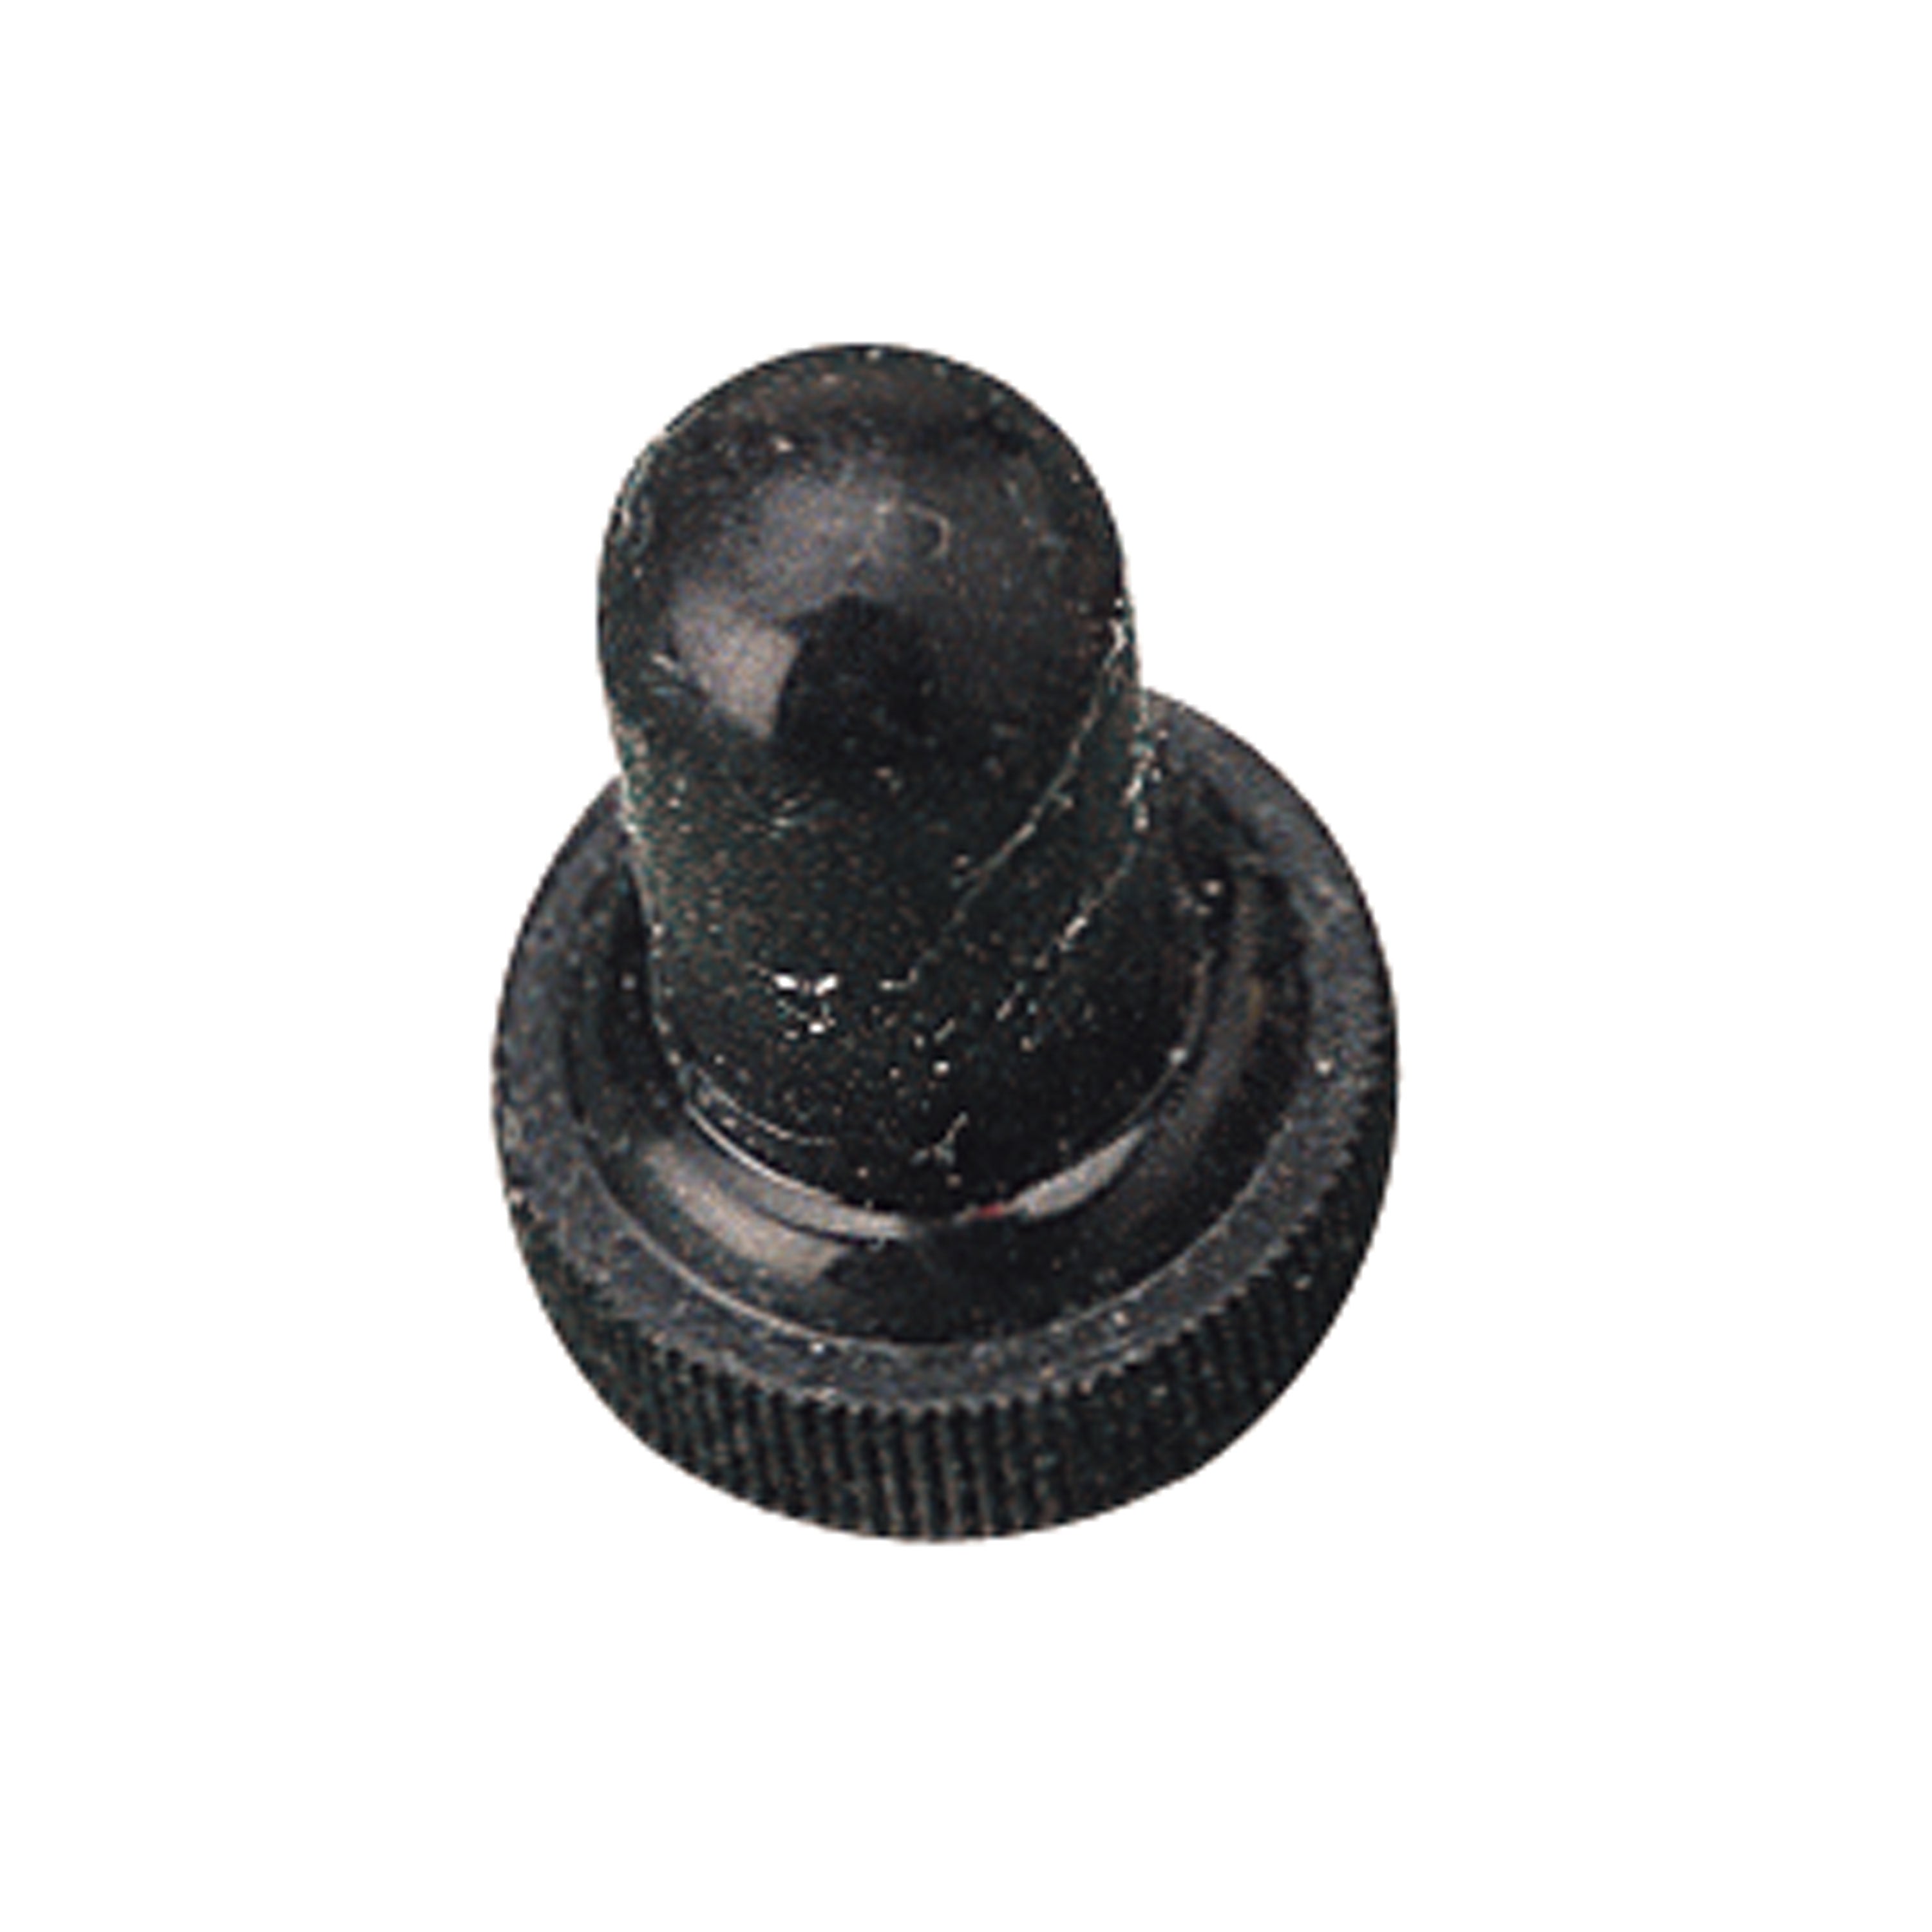 Sea-Dog 420479-1 Waterproof Cap for Toggle Switch